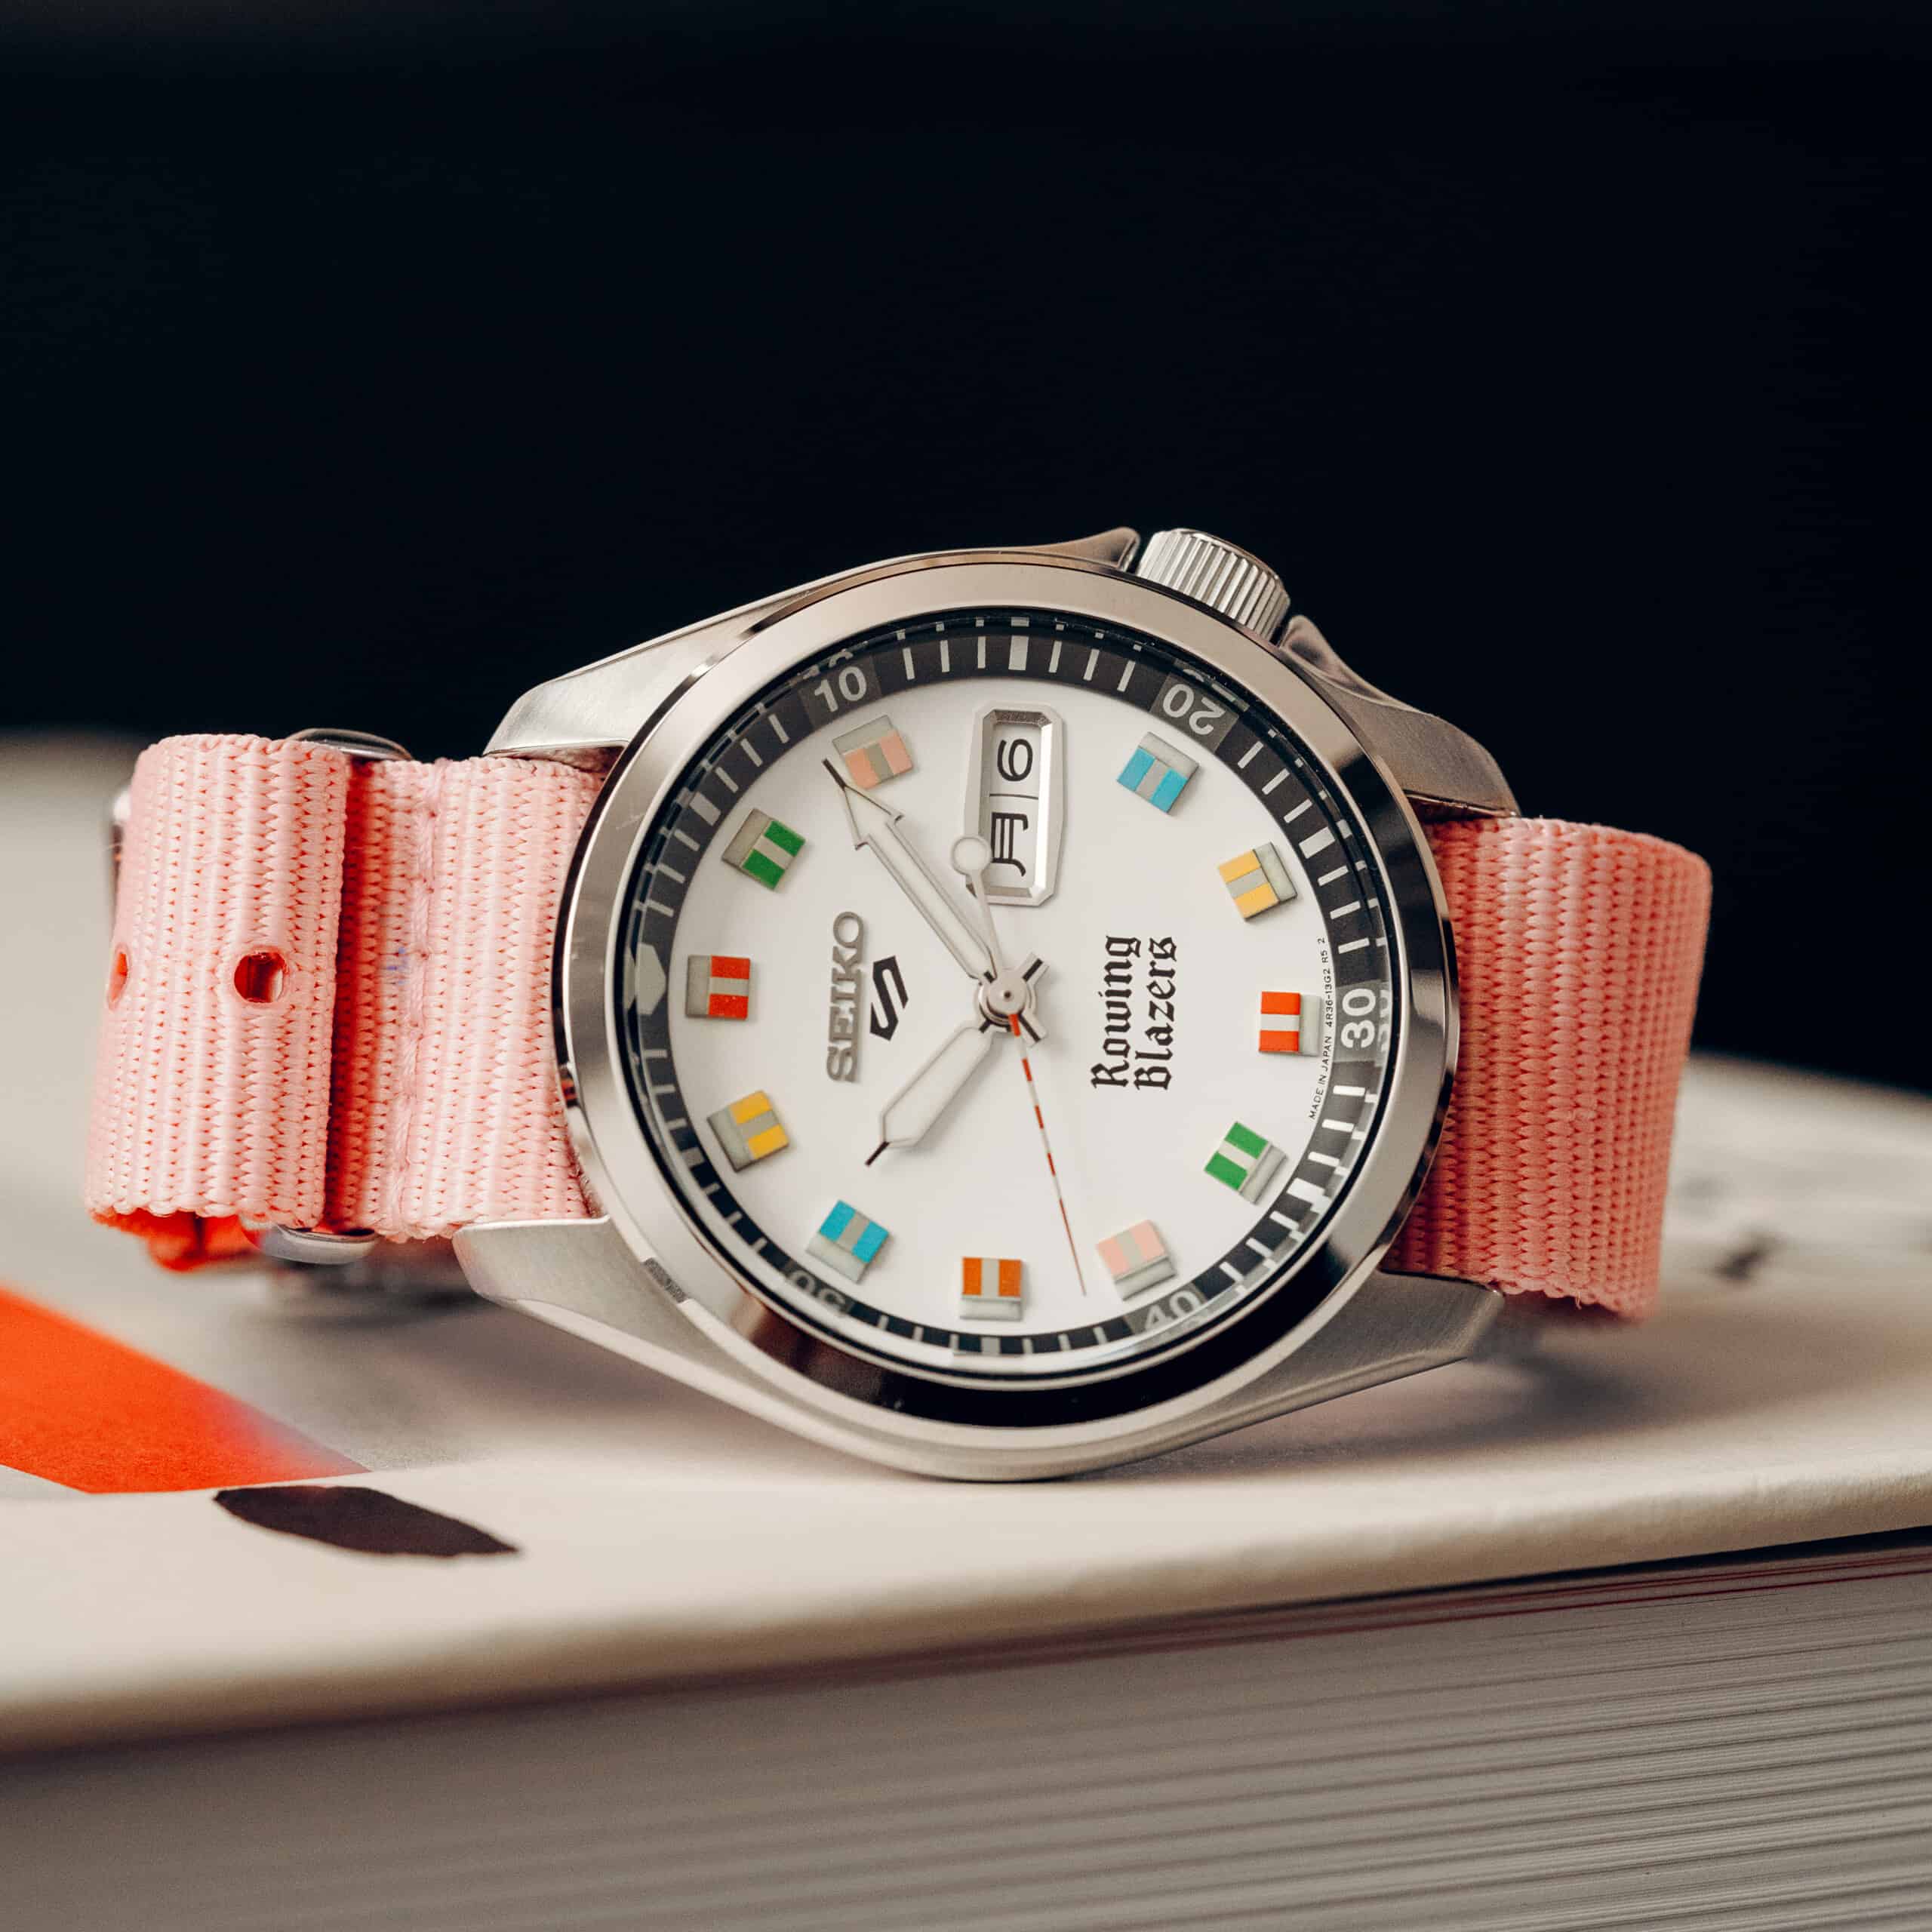 The Rowing Blazers x Seiko 5 Sports Collection Returns with a